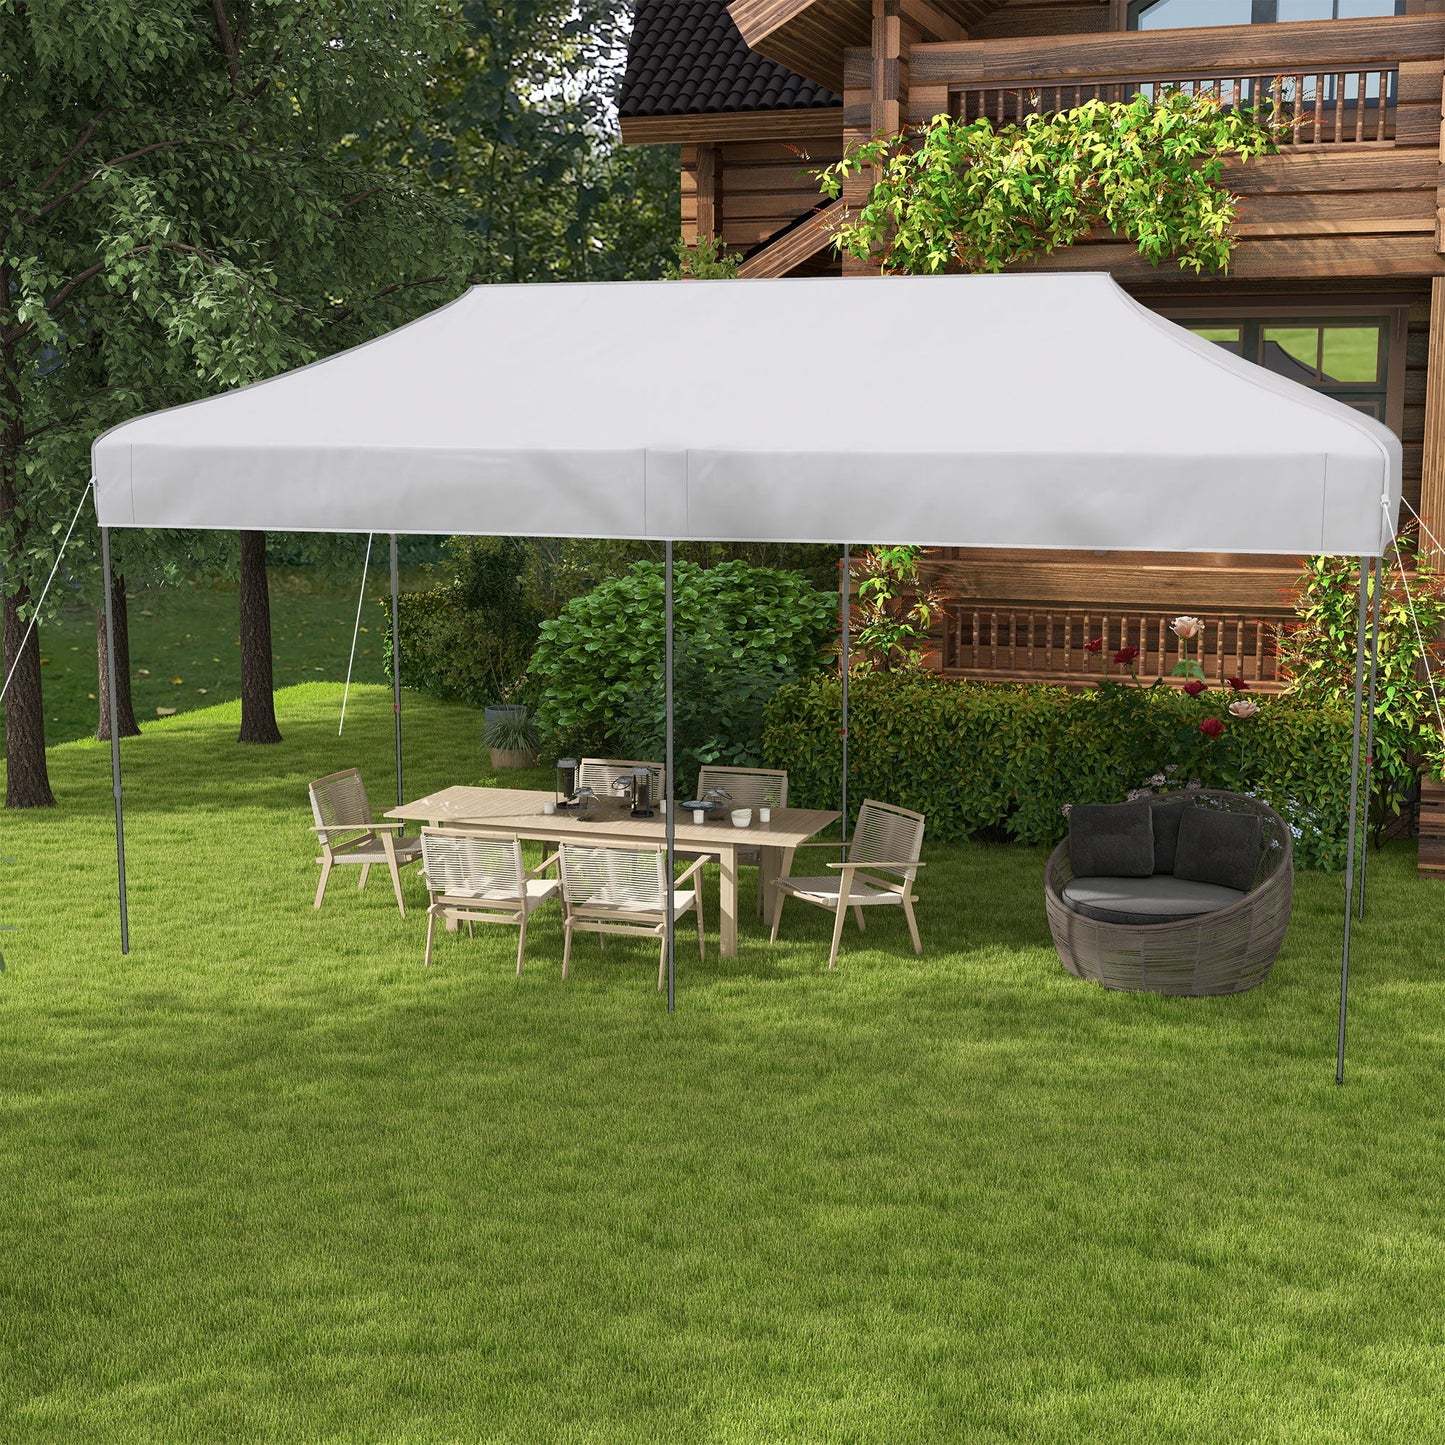 -Outsunny 10' x 20' Pop Up Canopy Tent, Outdoor Easy up Tent with 3-Level Adjustable Height & Wheeled Carry Bag, White - Outdoor Style Company